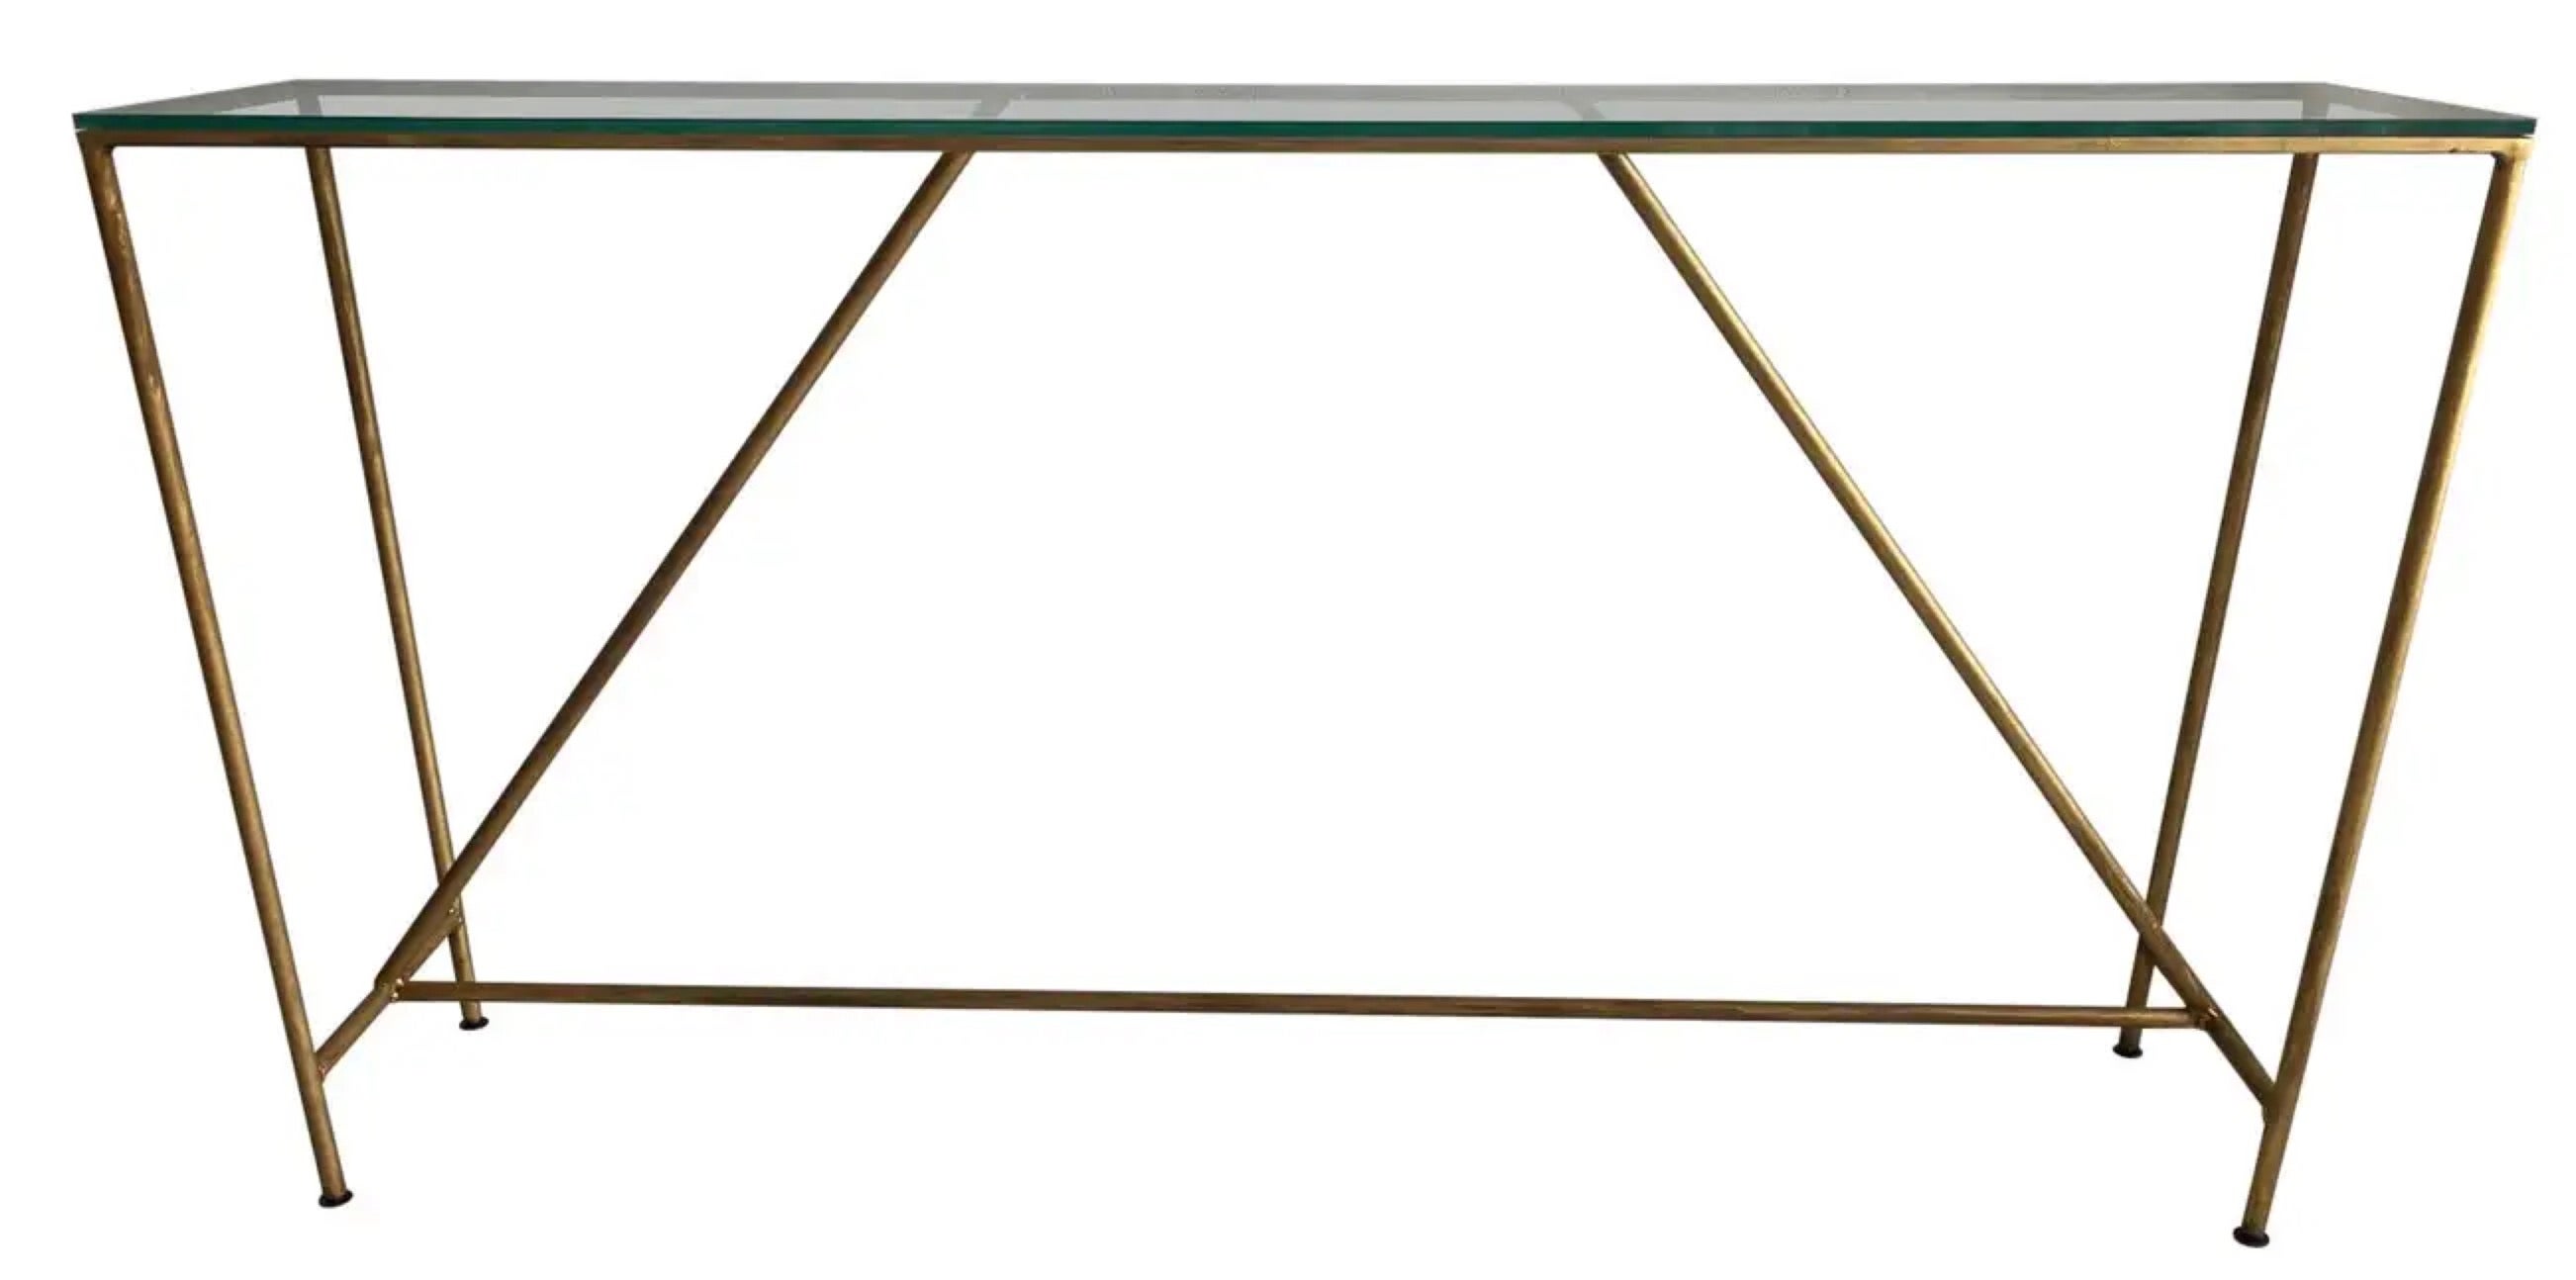 Contemporary and rustic at the same time, this custom made metal base has a gold finish but other finishes are available. Great as console or sofa table. The listing is for the table base only. We can help you source a top of your choice, be it